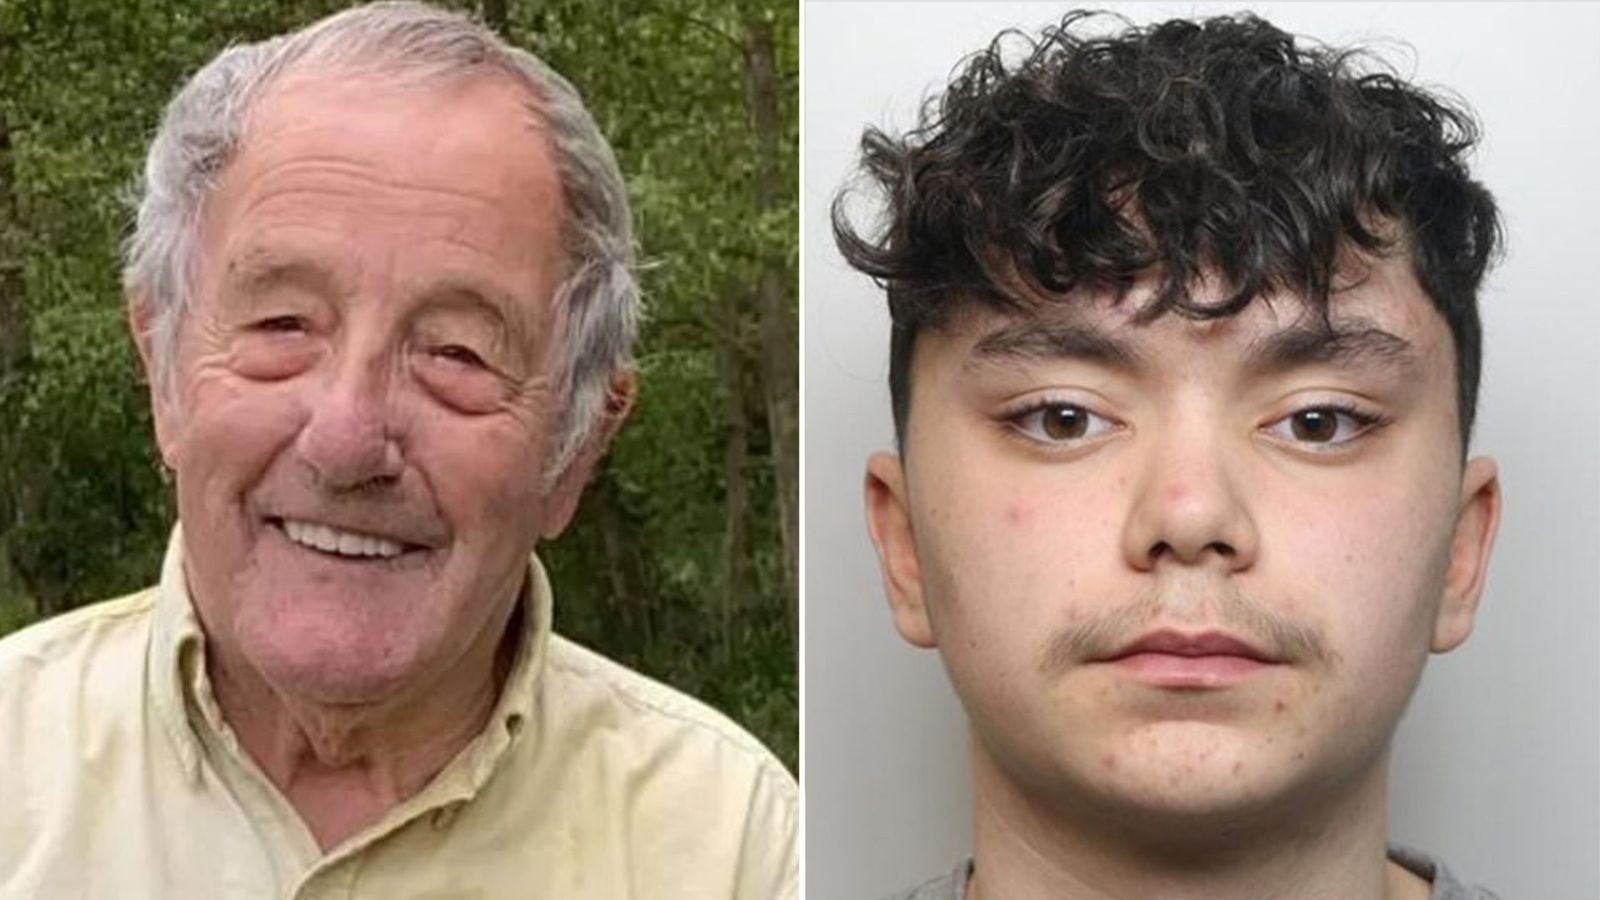 Derby teenager who killed 82-year-old man with single punch sentenced to two years in youth detention